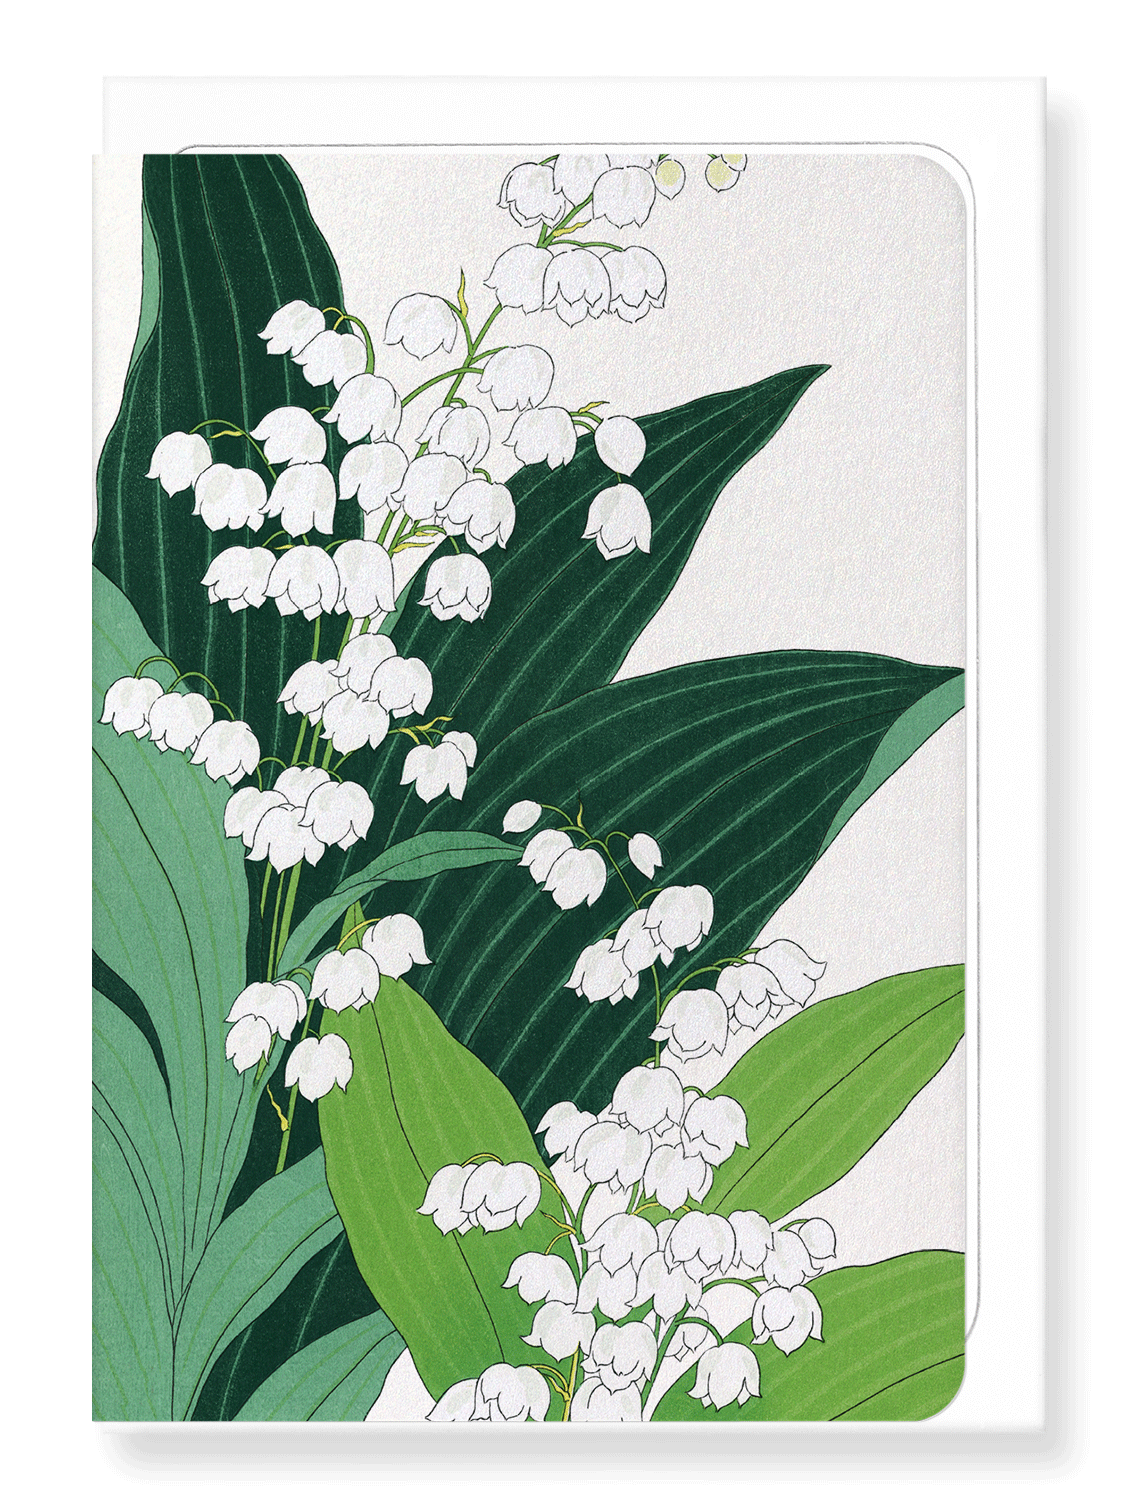 Ezen Designs - Lily of the valley - Greeting Card - Front